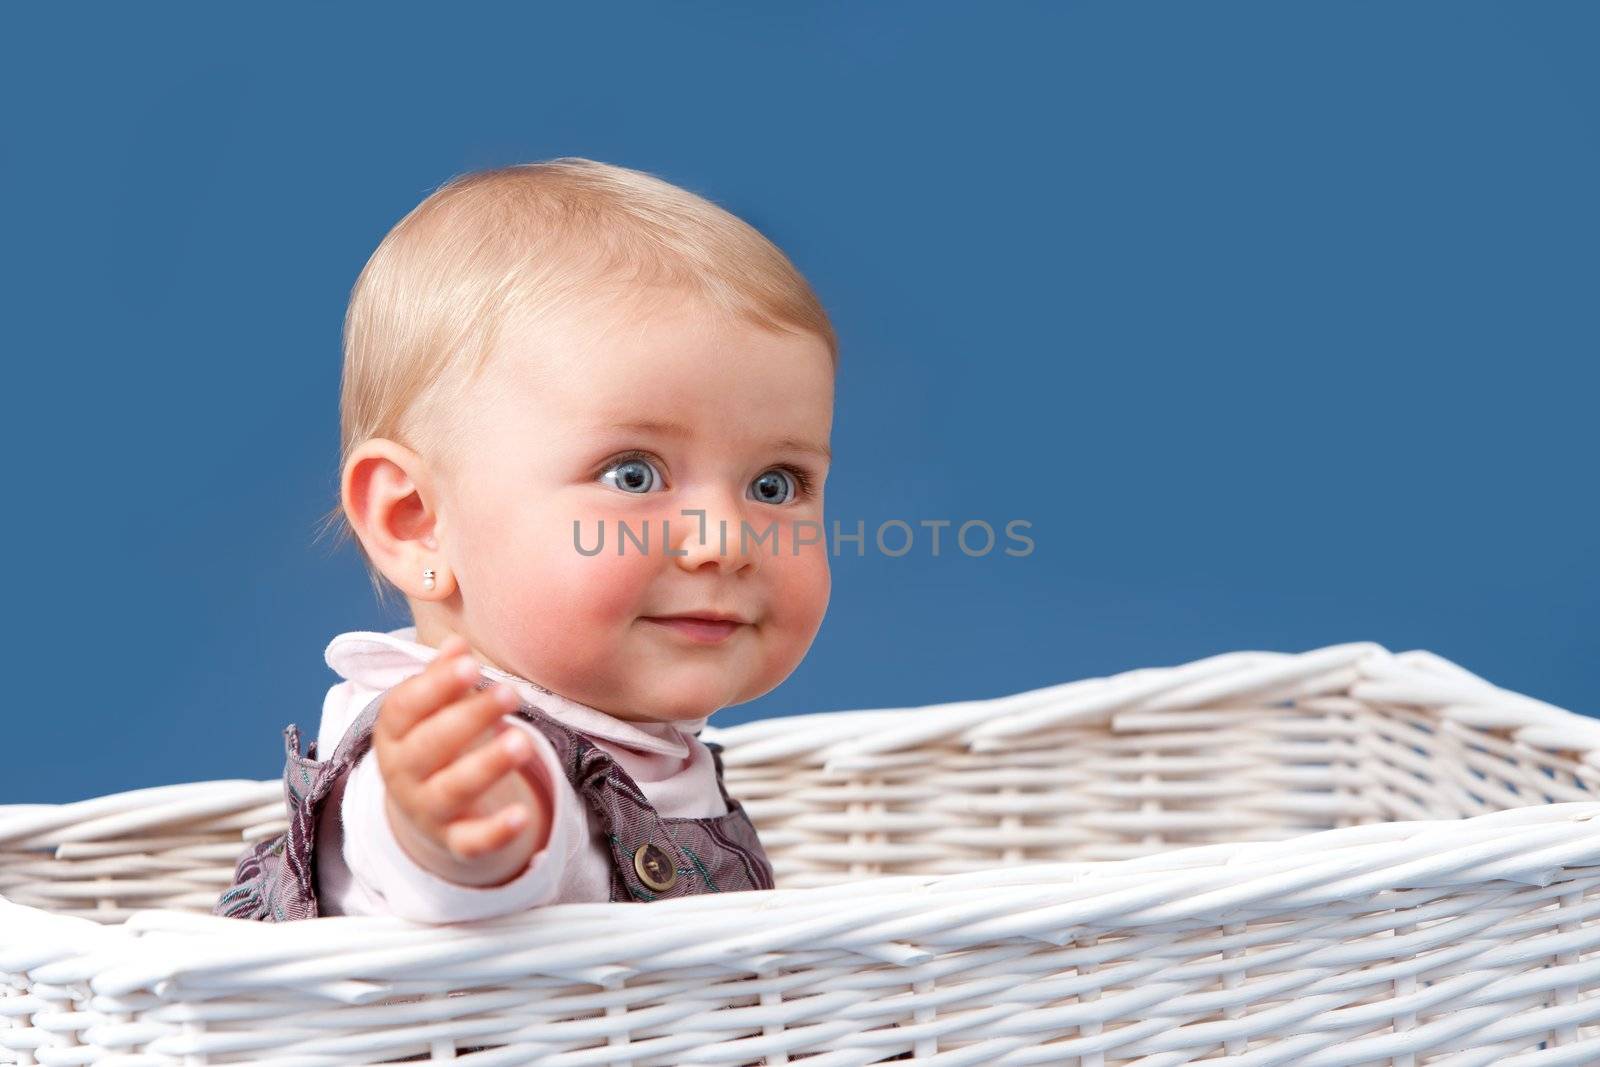 Blue eyed baby girl with relaxed expression sitting in a white basket with blue background.